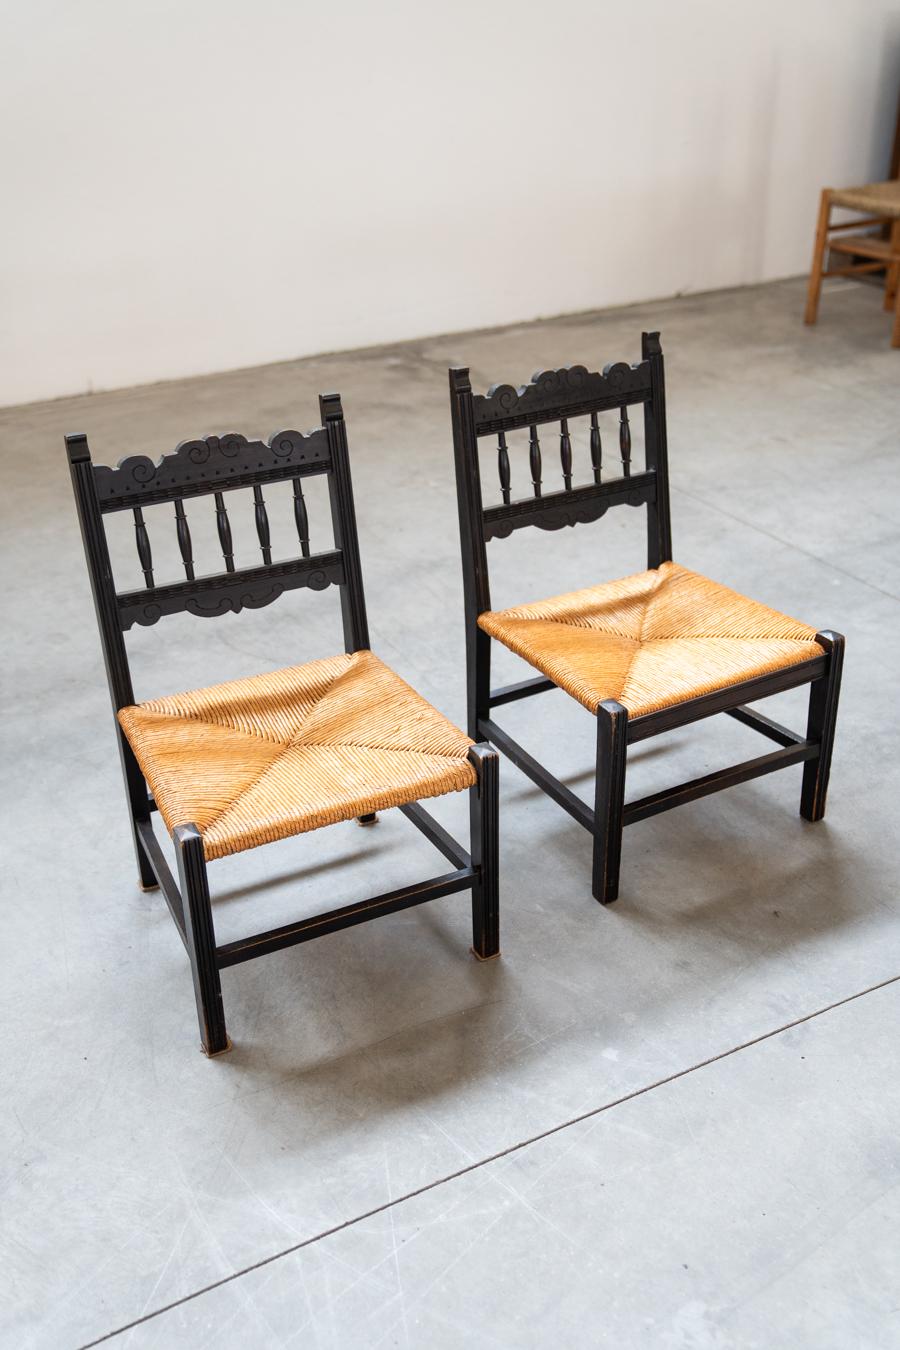 2 low chamber chairs made of hand-woven rice straw, 1950s/1960s
More information on the article
good condition, only a few slight marks on the wood
MEASUREMENTS H73 x W34 x D34 - Hsit 34cm - Kg3 cad

Style
Vintage
Periodo del design
1950 -